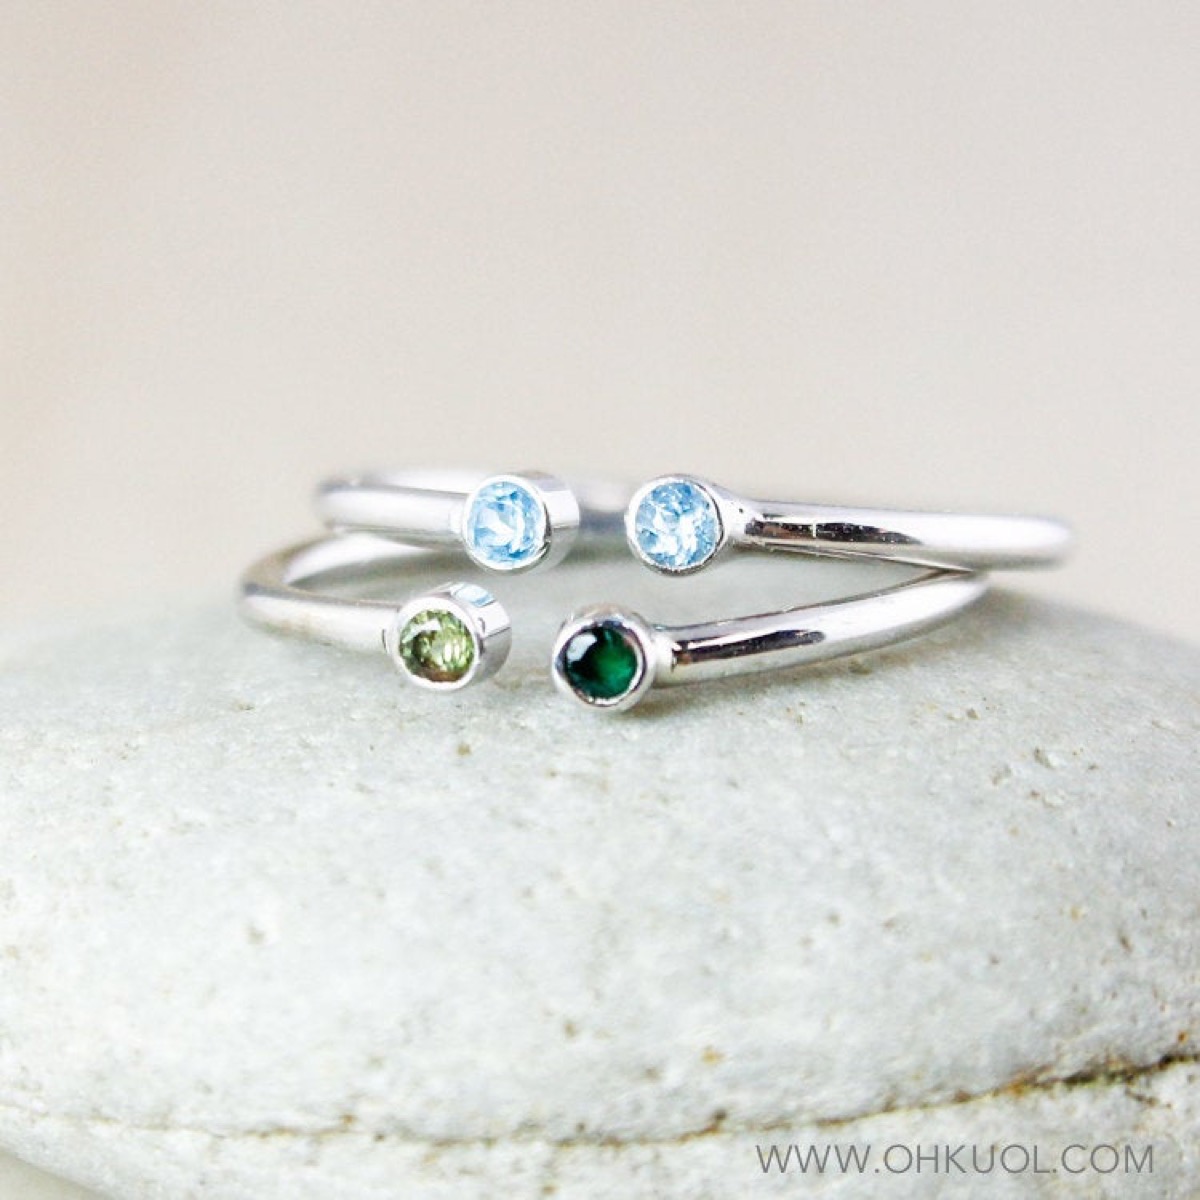 two silver rings with birthstones on top of each other, mother daughter gifts